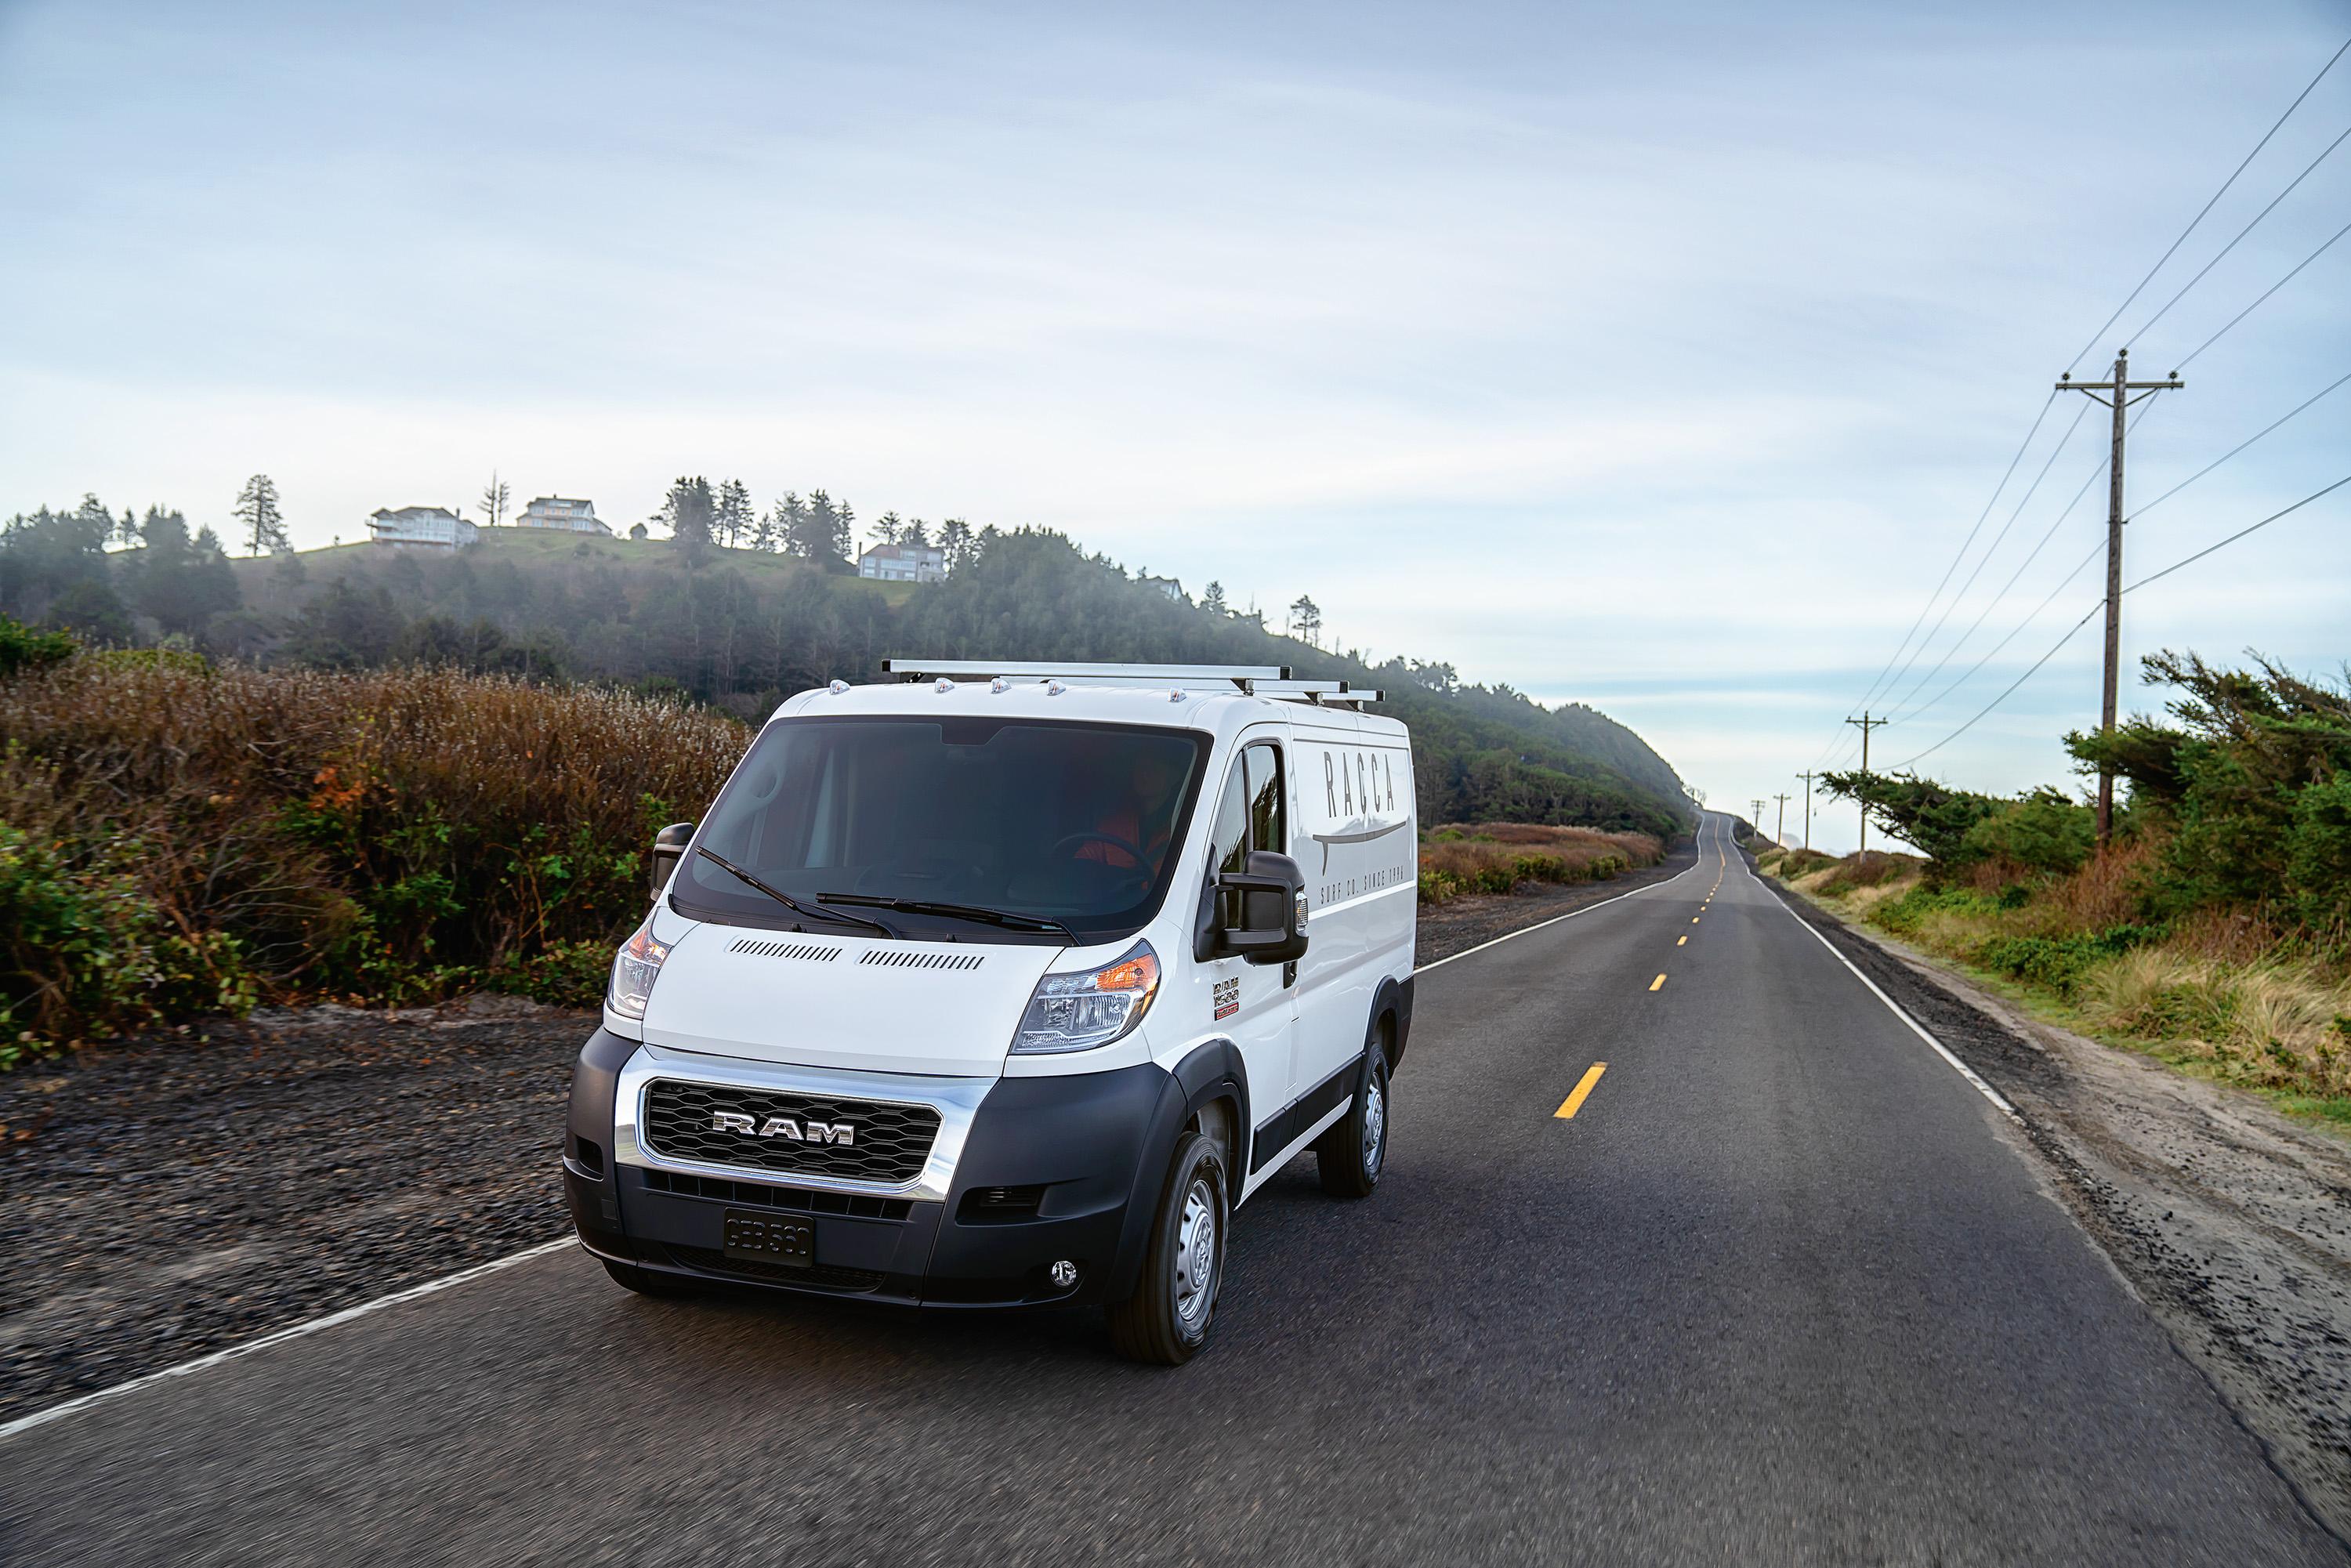 The Ram 2500 ProMaster is one of the best vans for climbing trips.